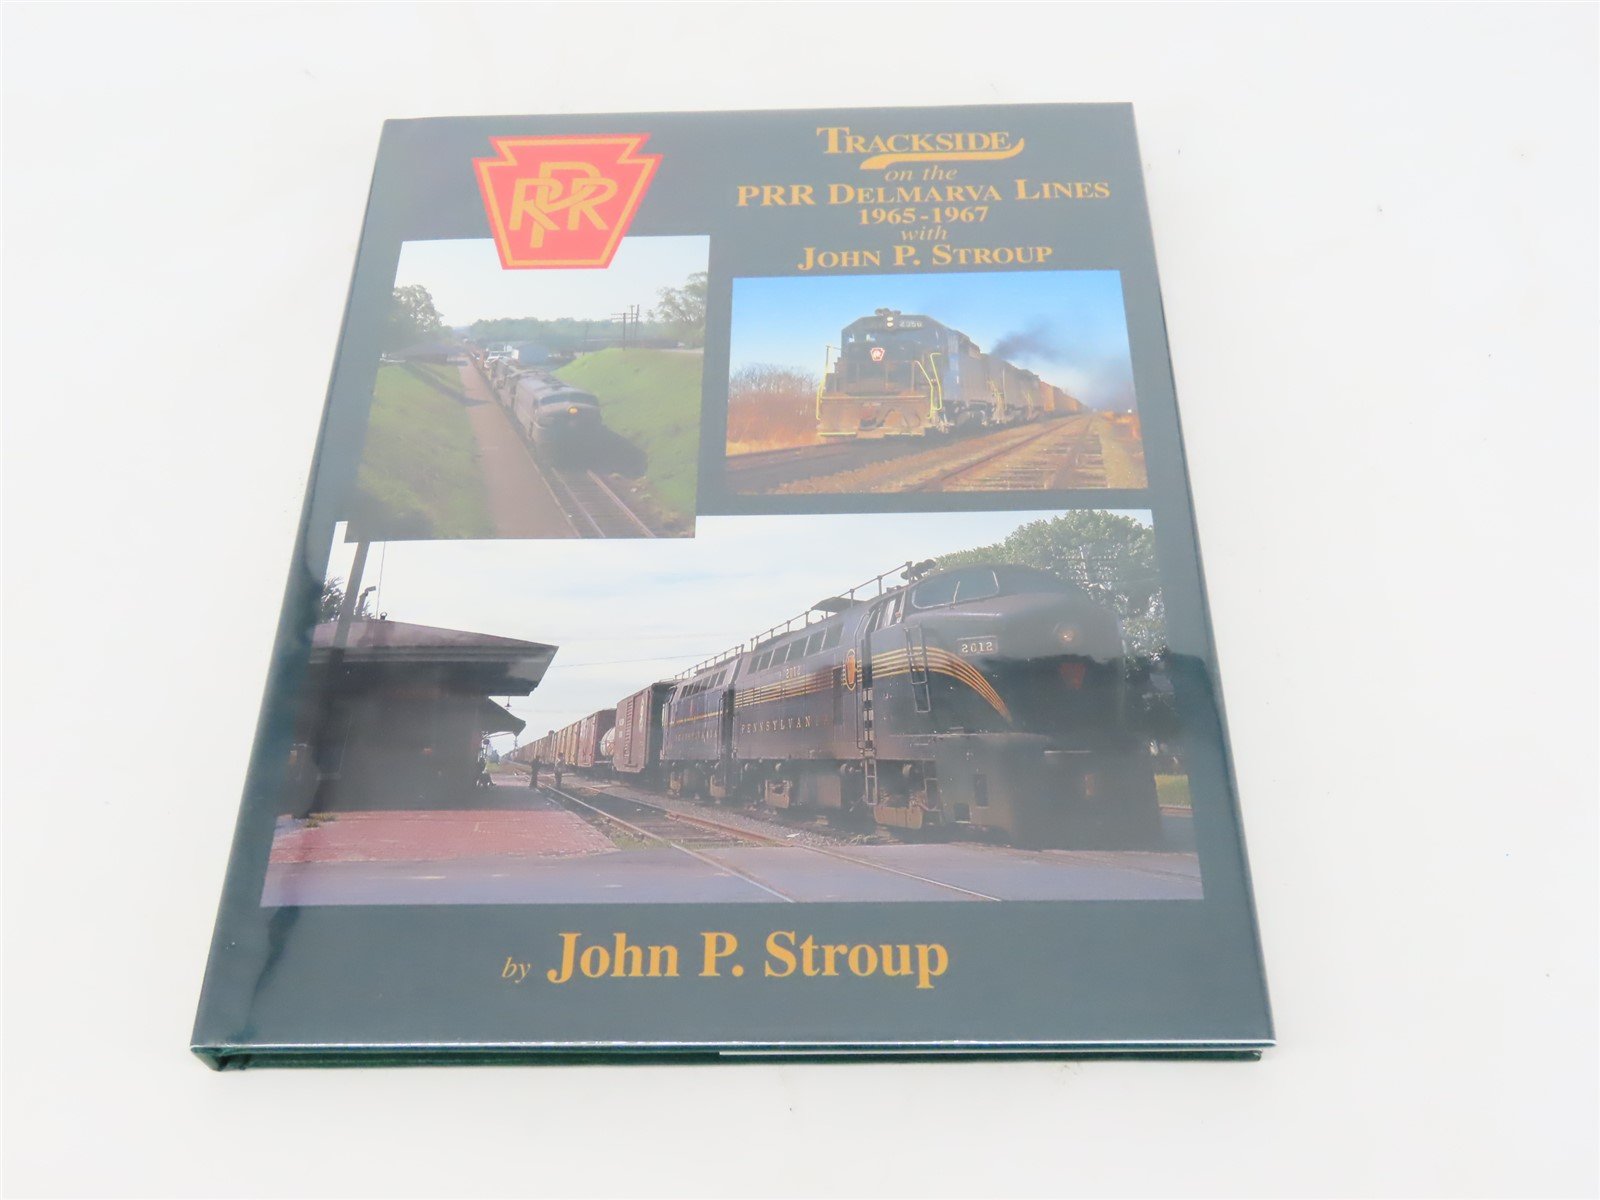 Morning Sun: Trackside on the PRR Delmarva Lines by John P Stroup ©2008 HC Book